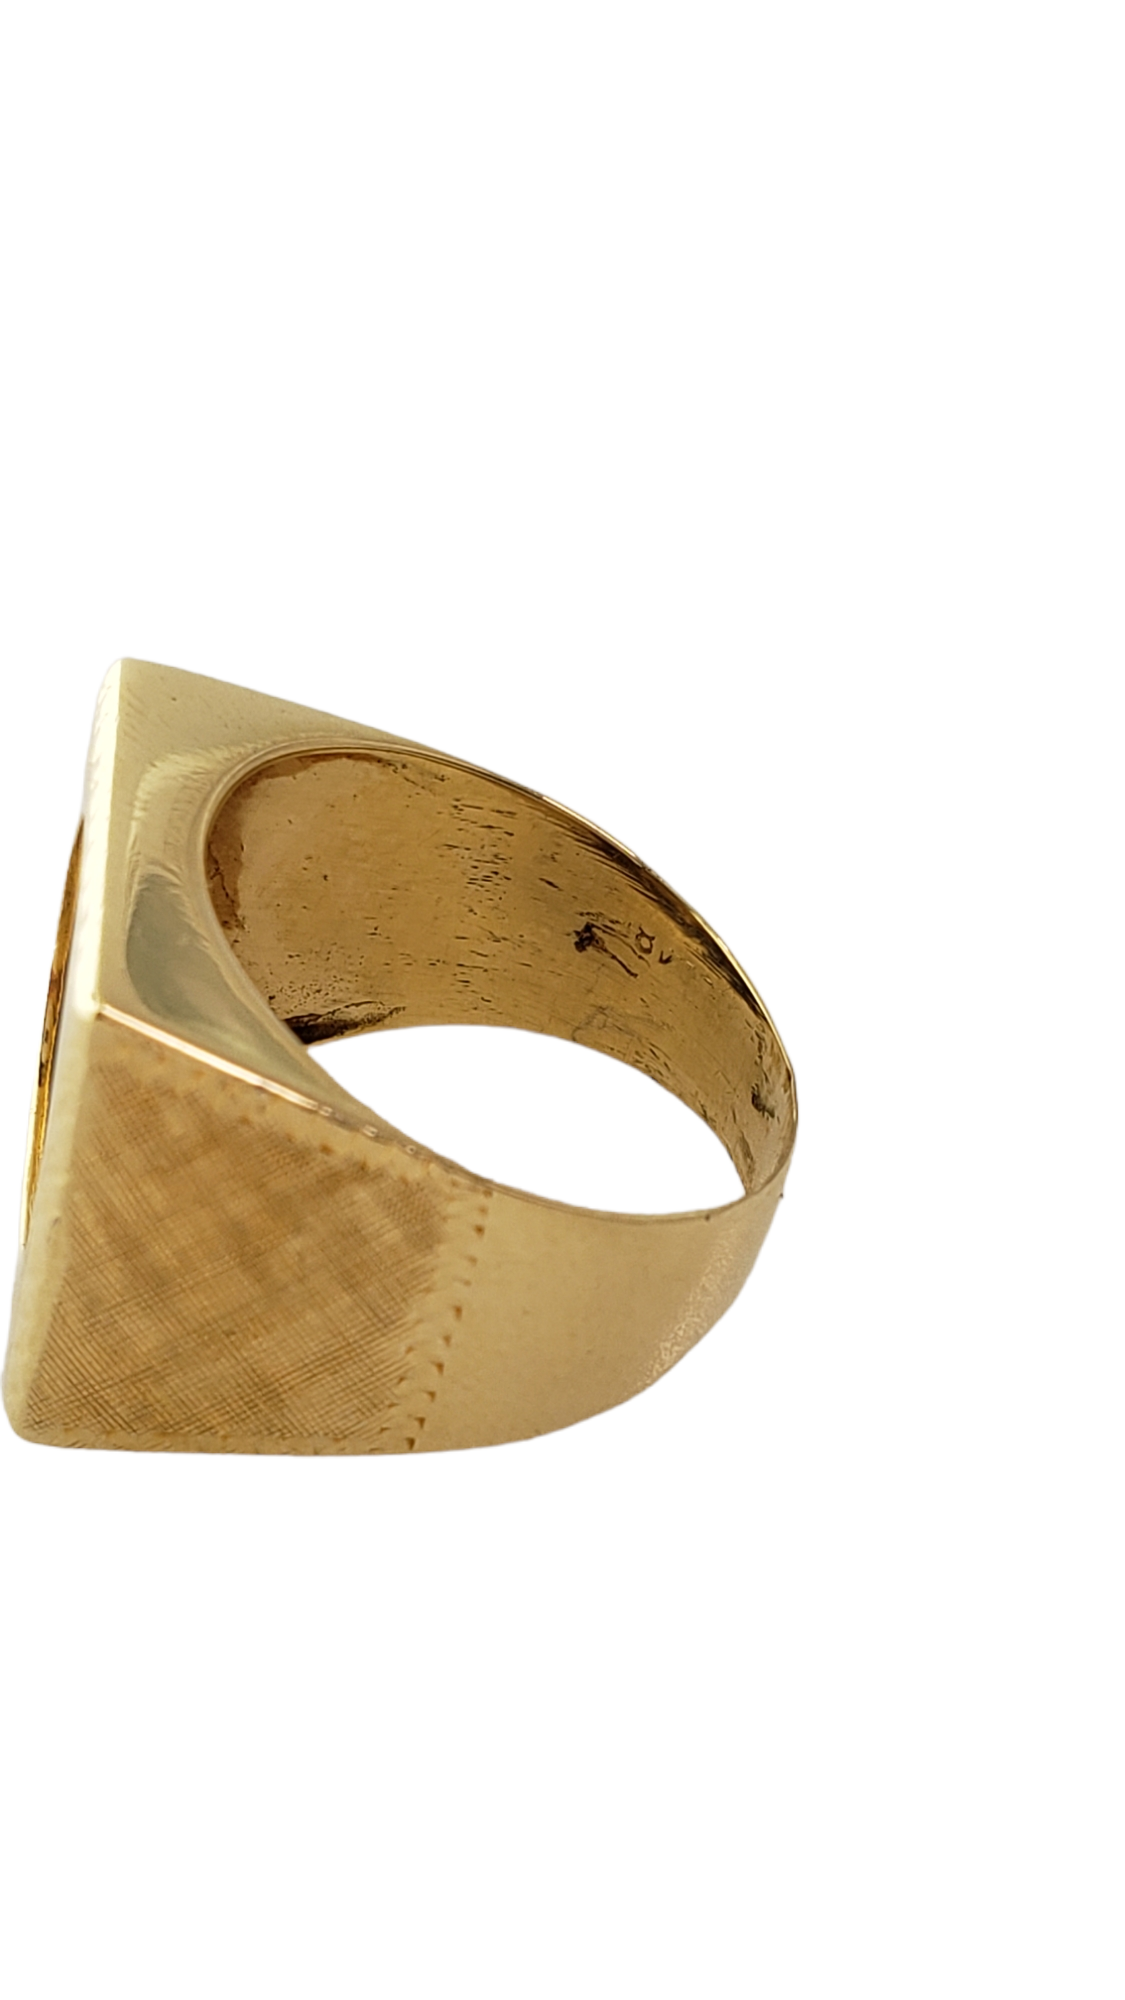 Caciques De Venezuela Textured Back Set Square Coin Ring made in 14-Karat Yellow Gold